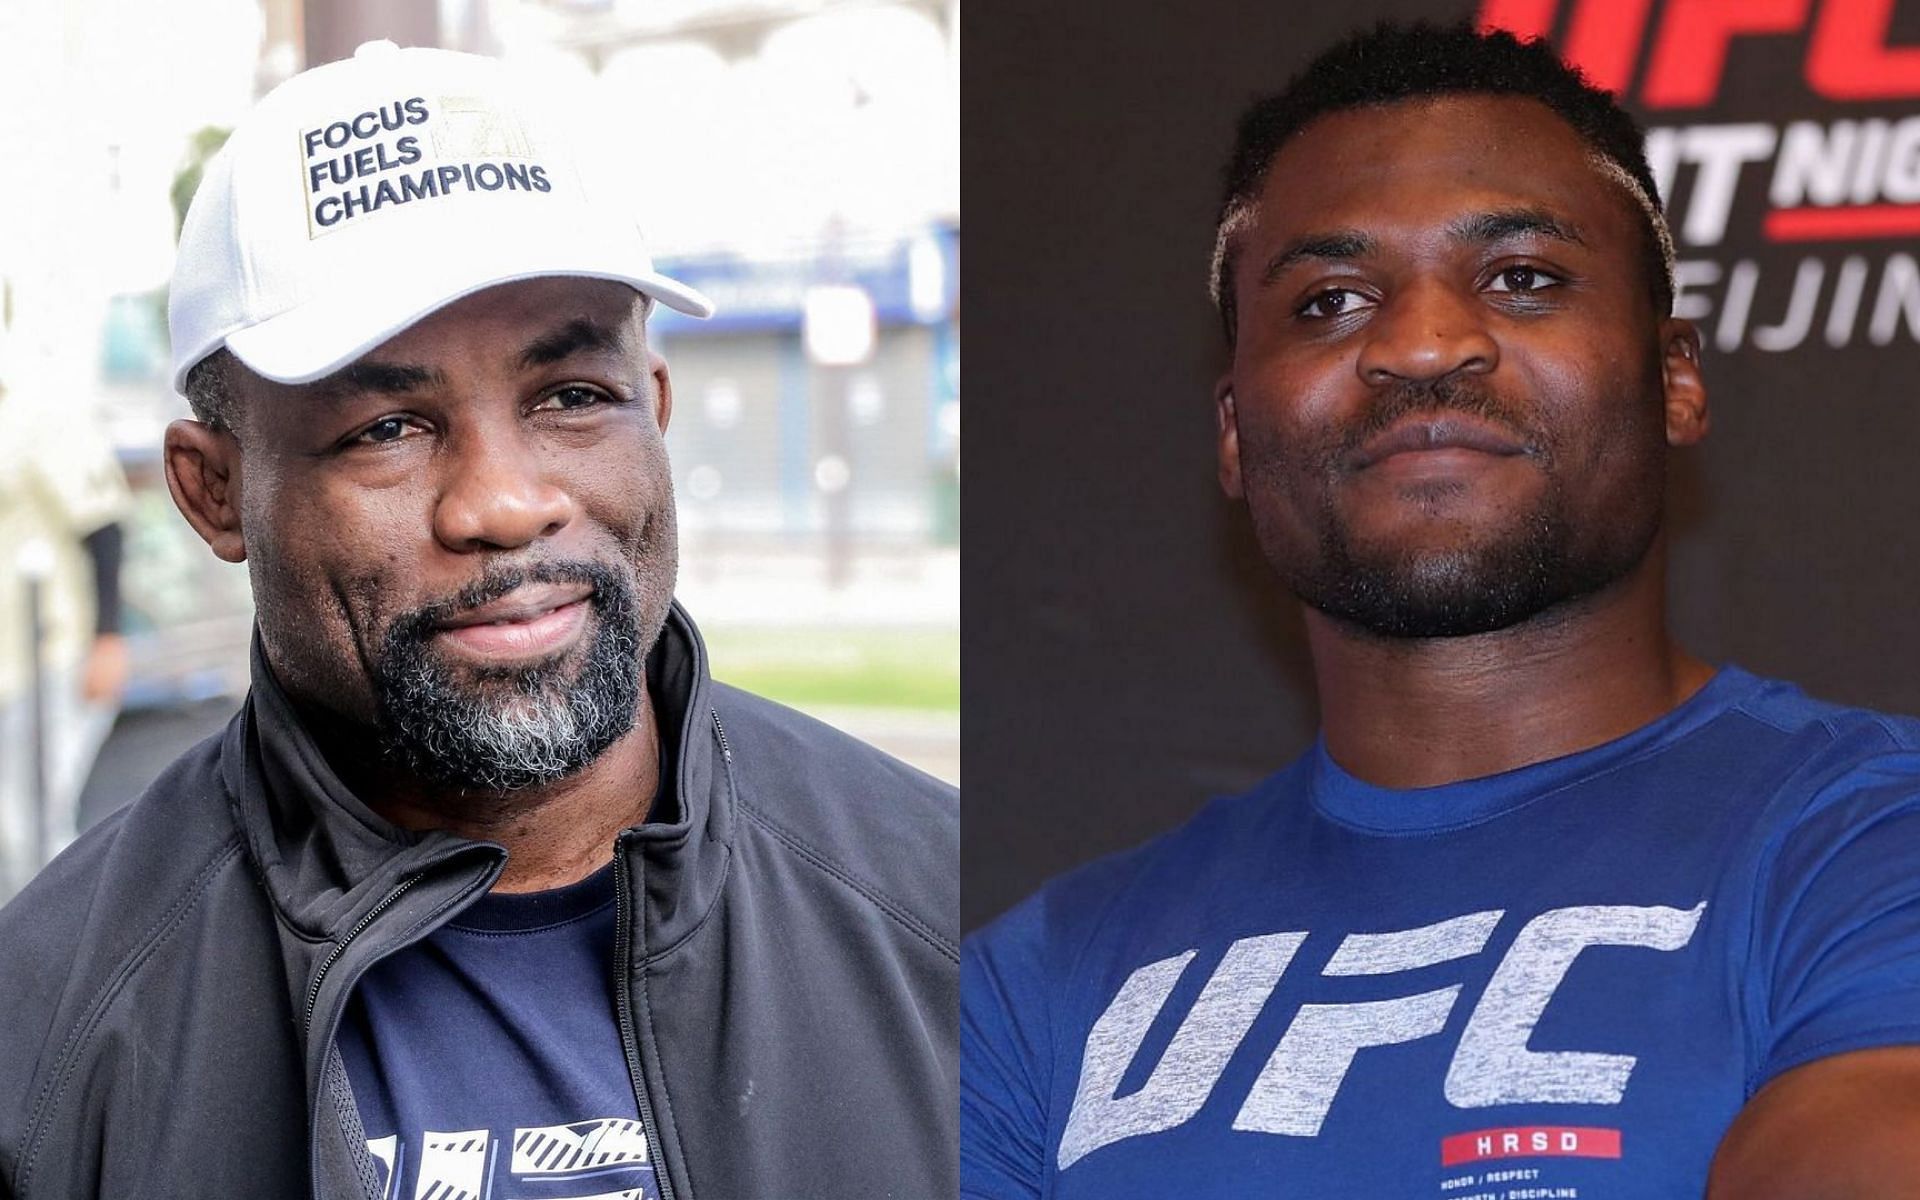 Fernand Lopez (left) and Francis Ngannou (right) [Left photo via @lopez_fernand on IG]